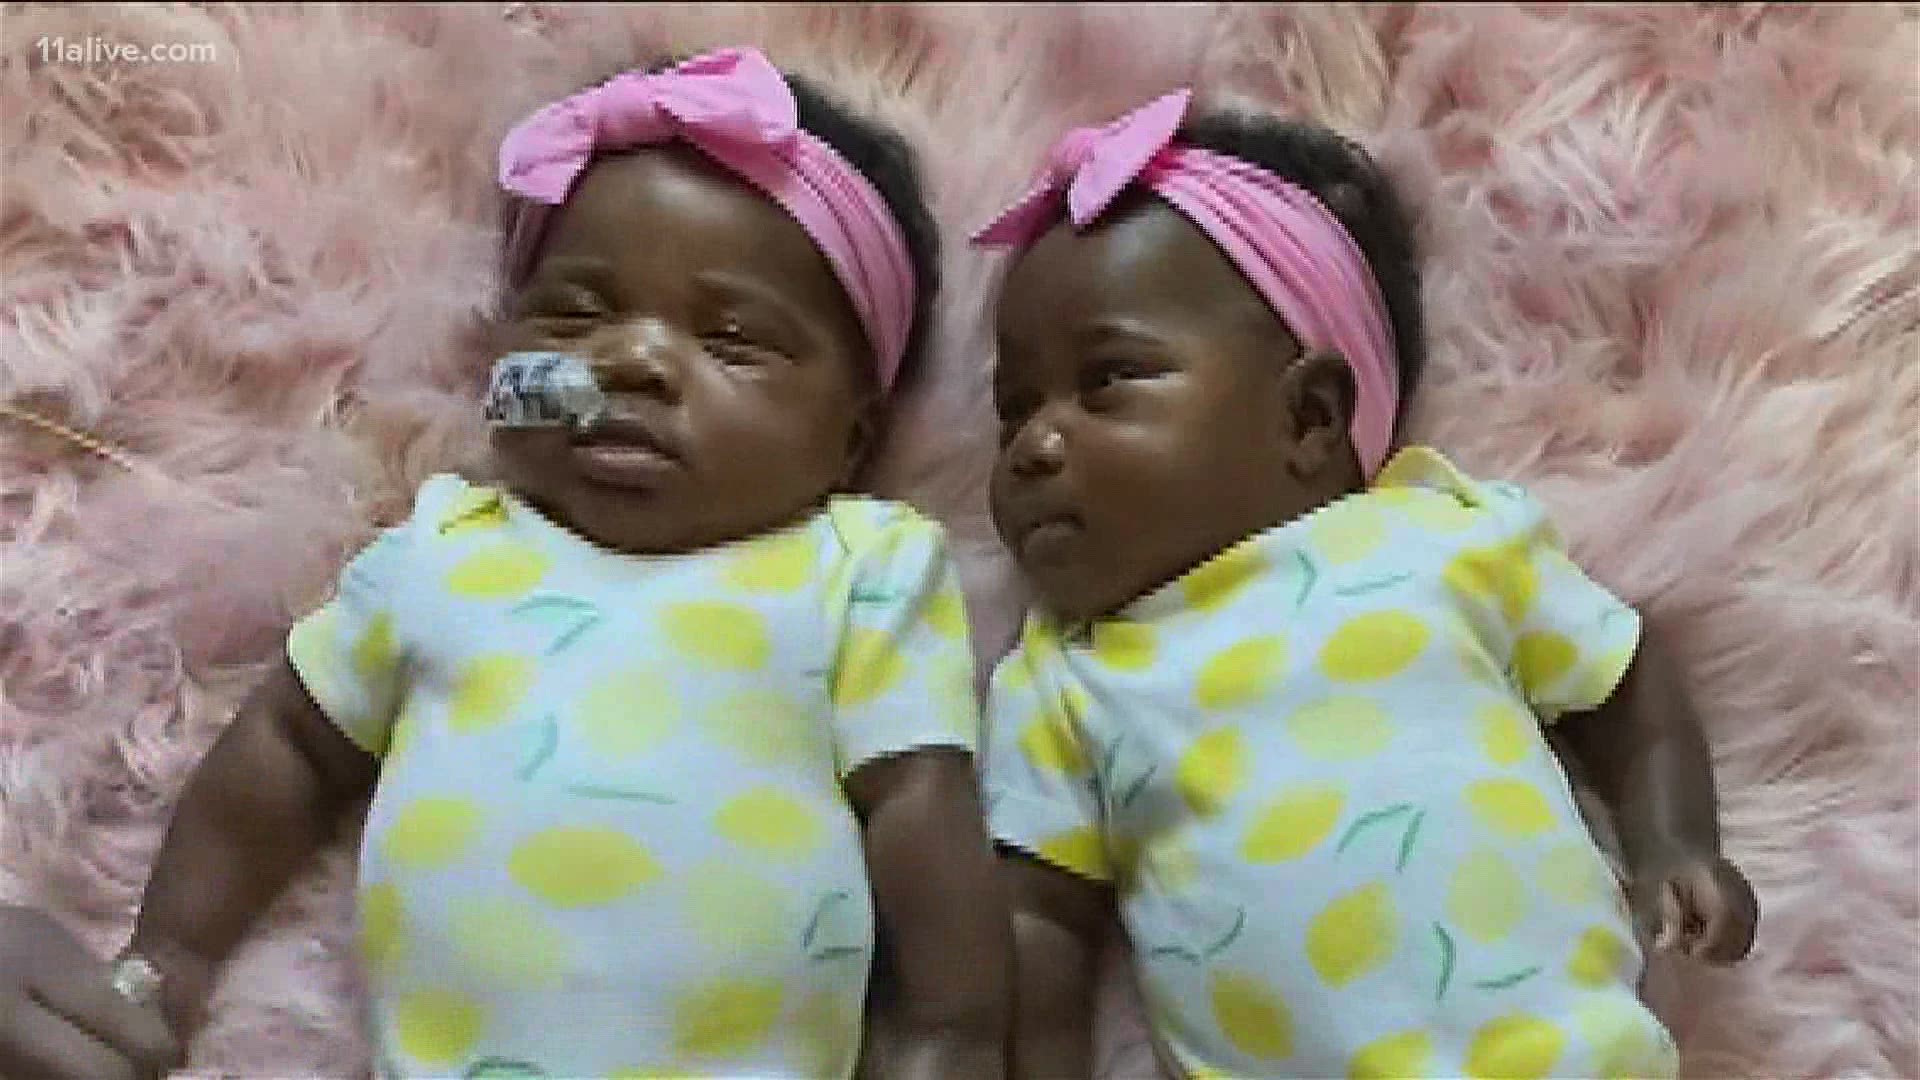 Between Justice and her twin, they spent 168 days in the hospital. They are finally home.